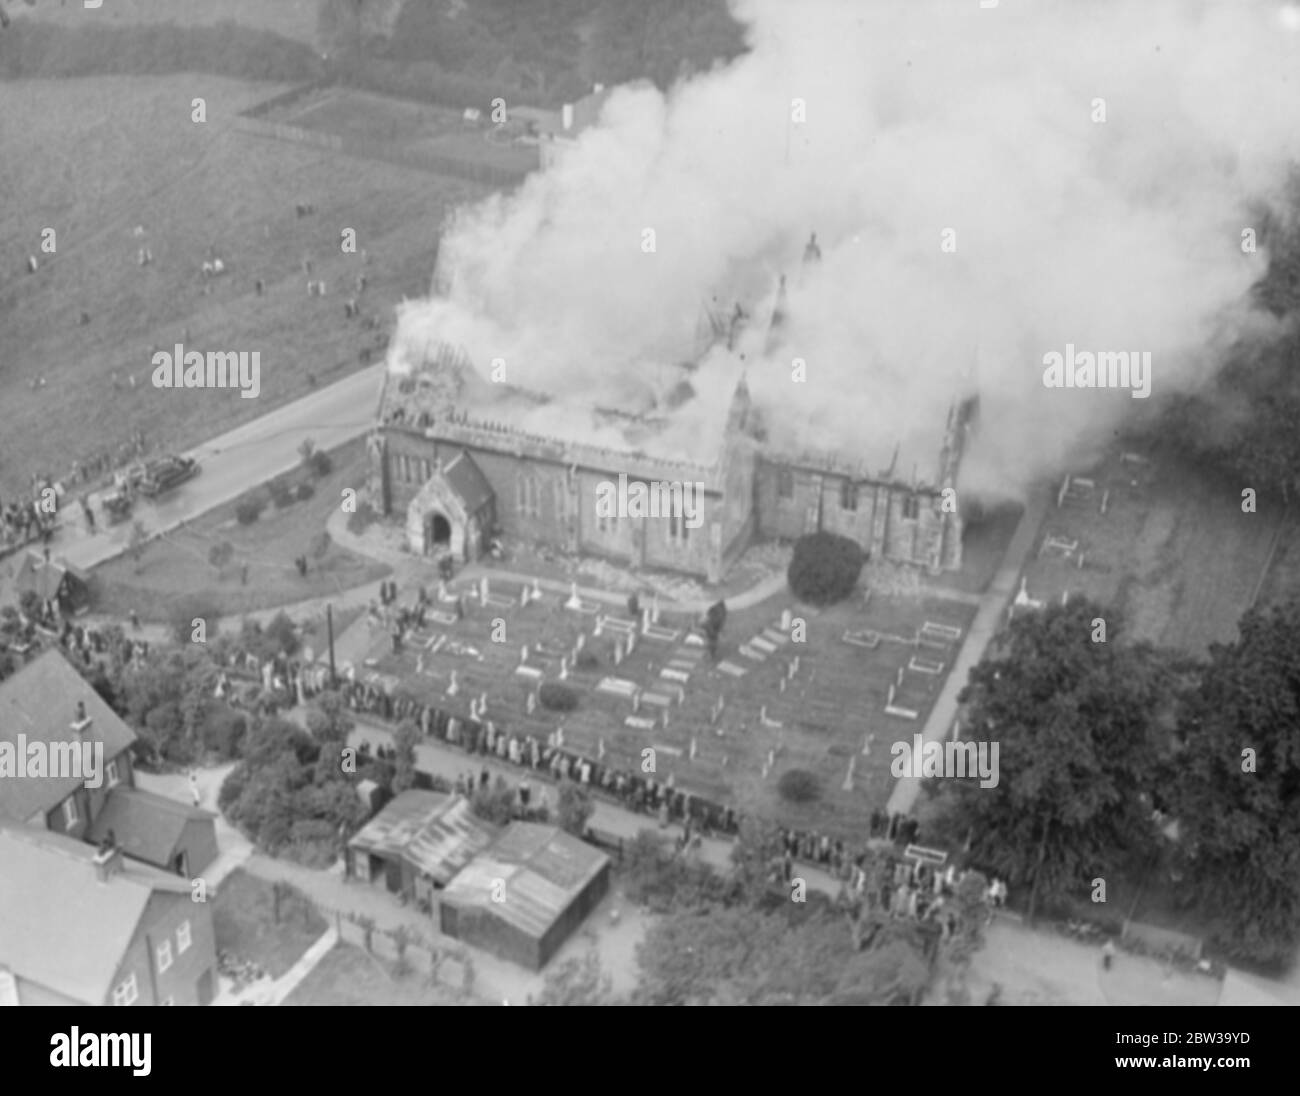 Bishop Stortford church completely destroyed by fire . Fire brigades hampered by water shortage . 21 June 1935 Stock Photo